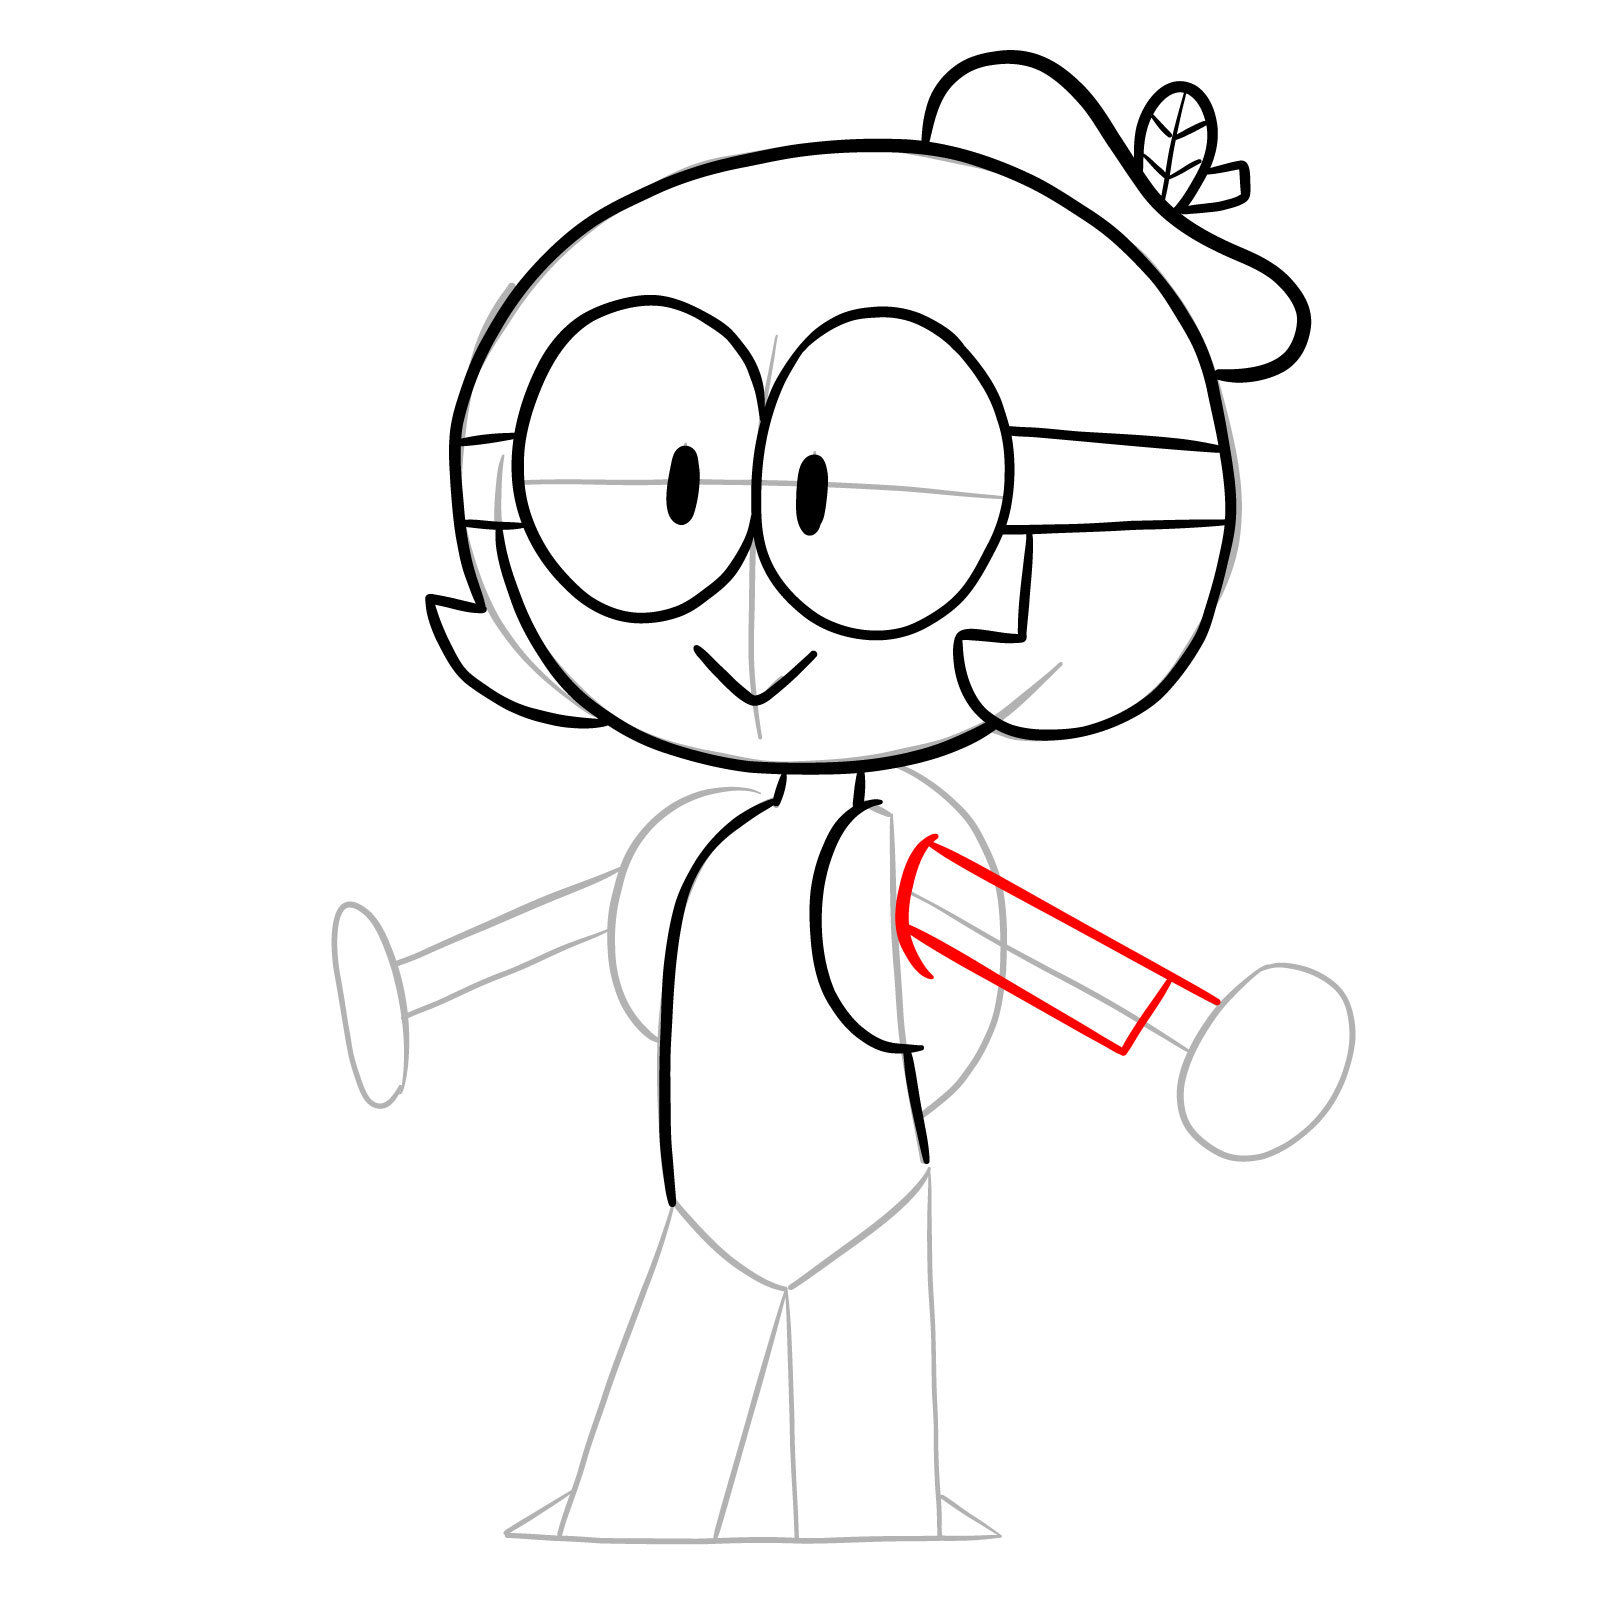 How to draw Dendy from OK K.O.! - step 13